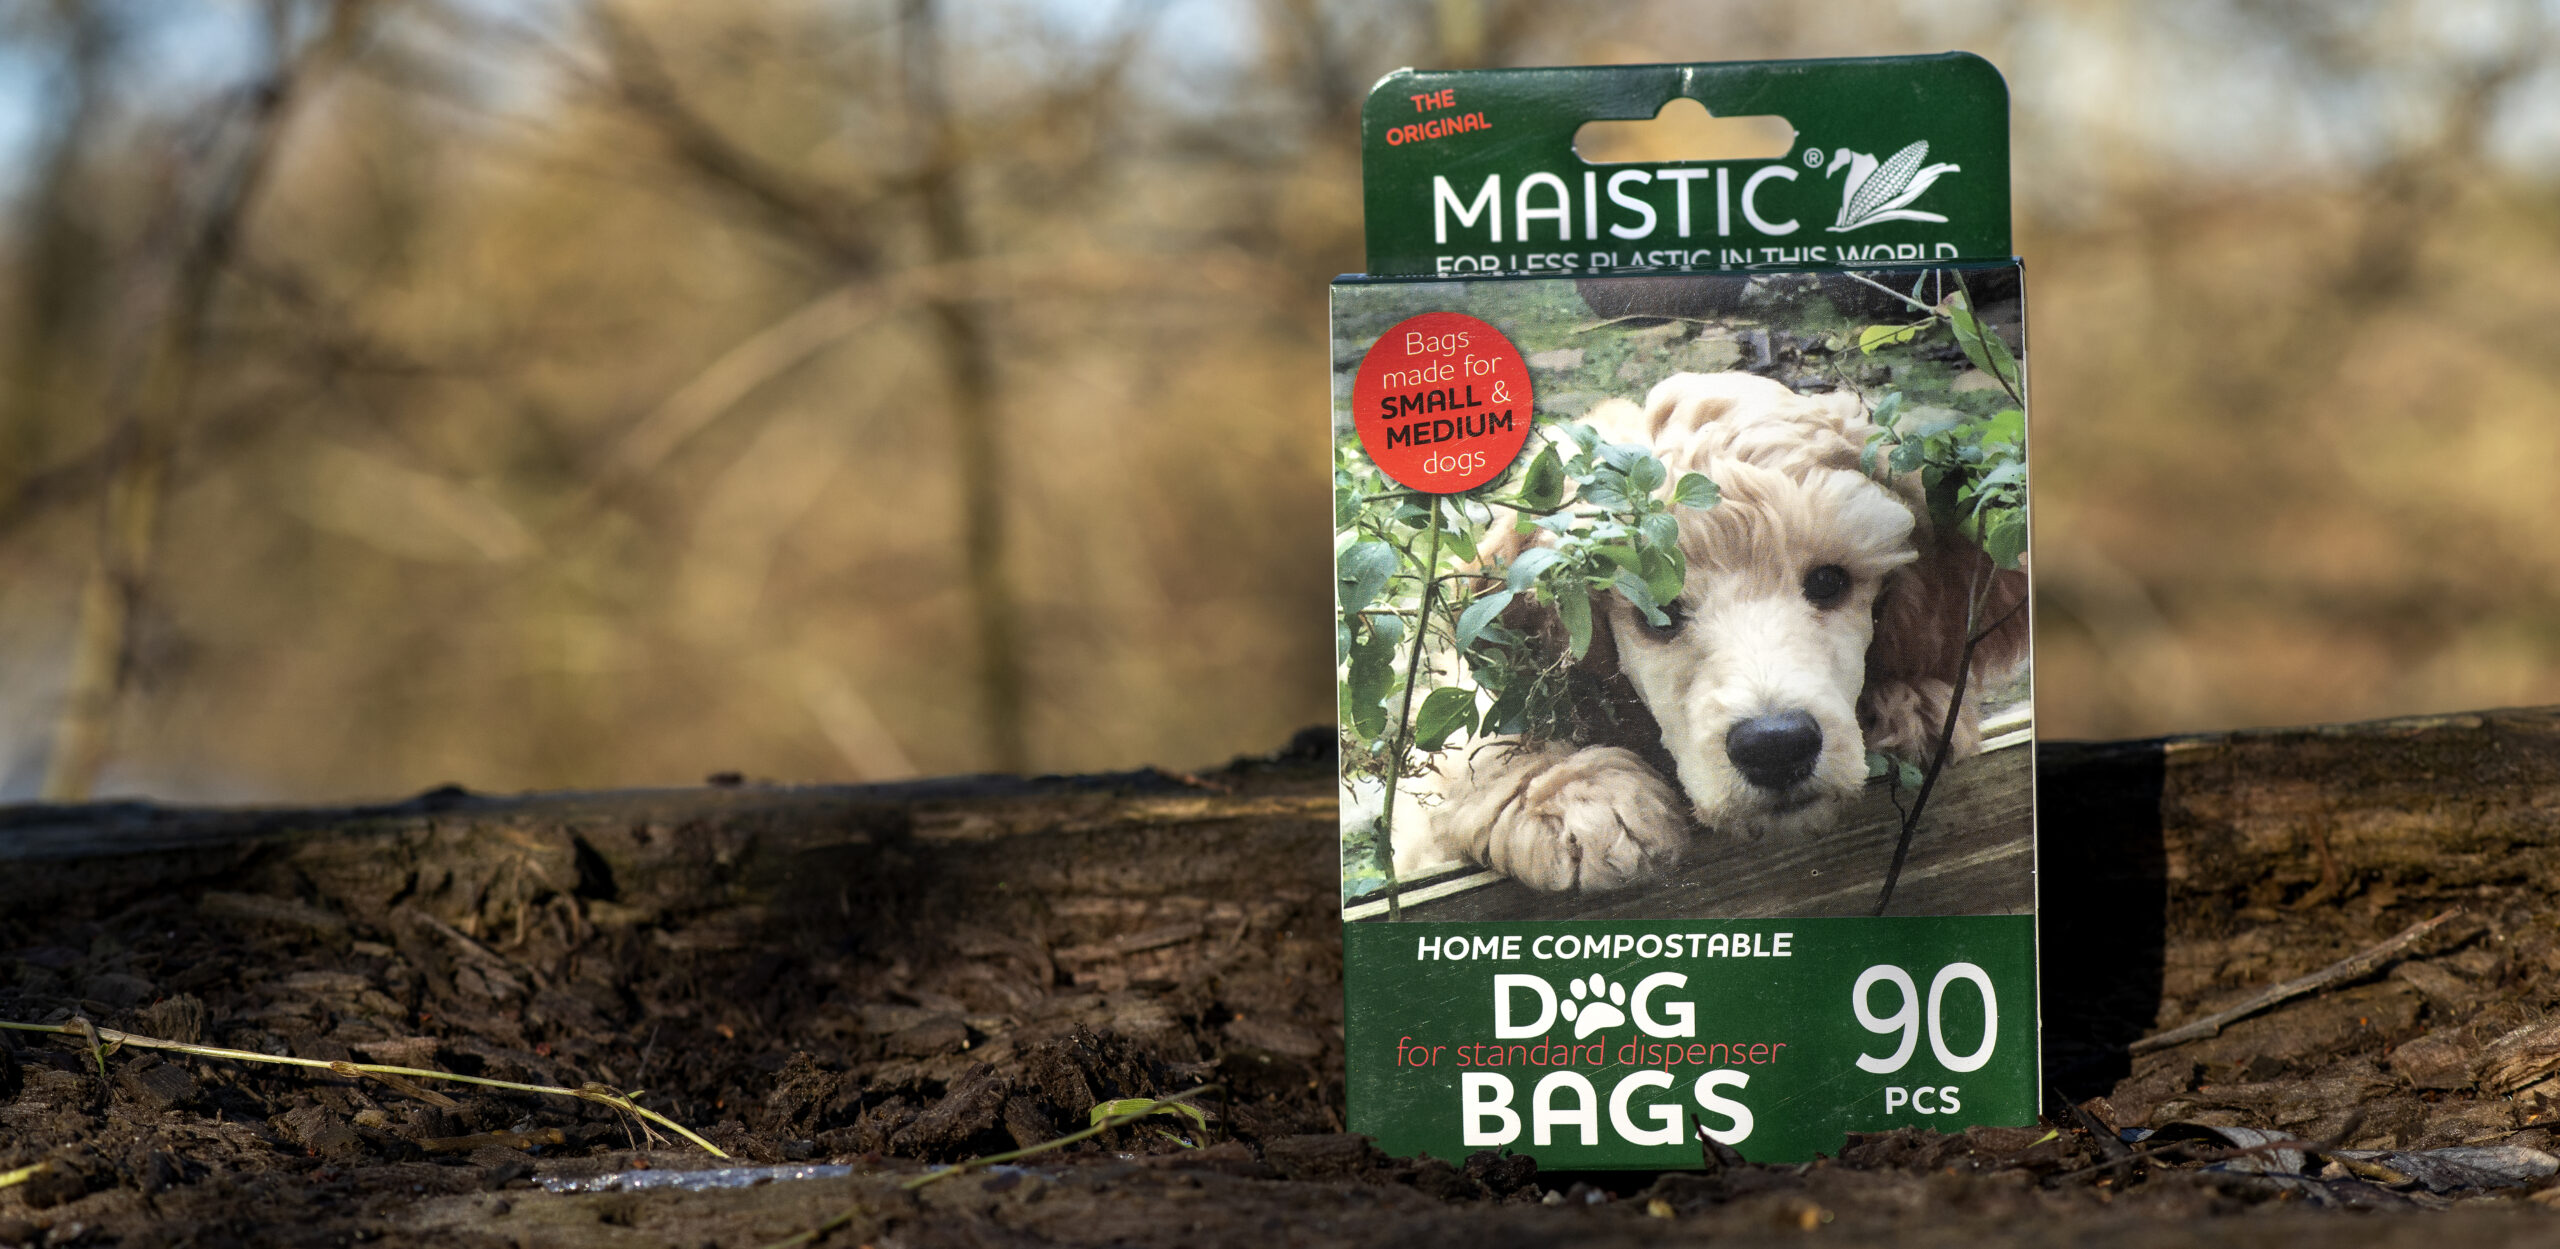 Now biodegradable dog bags must be compostable